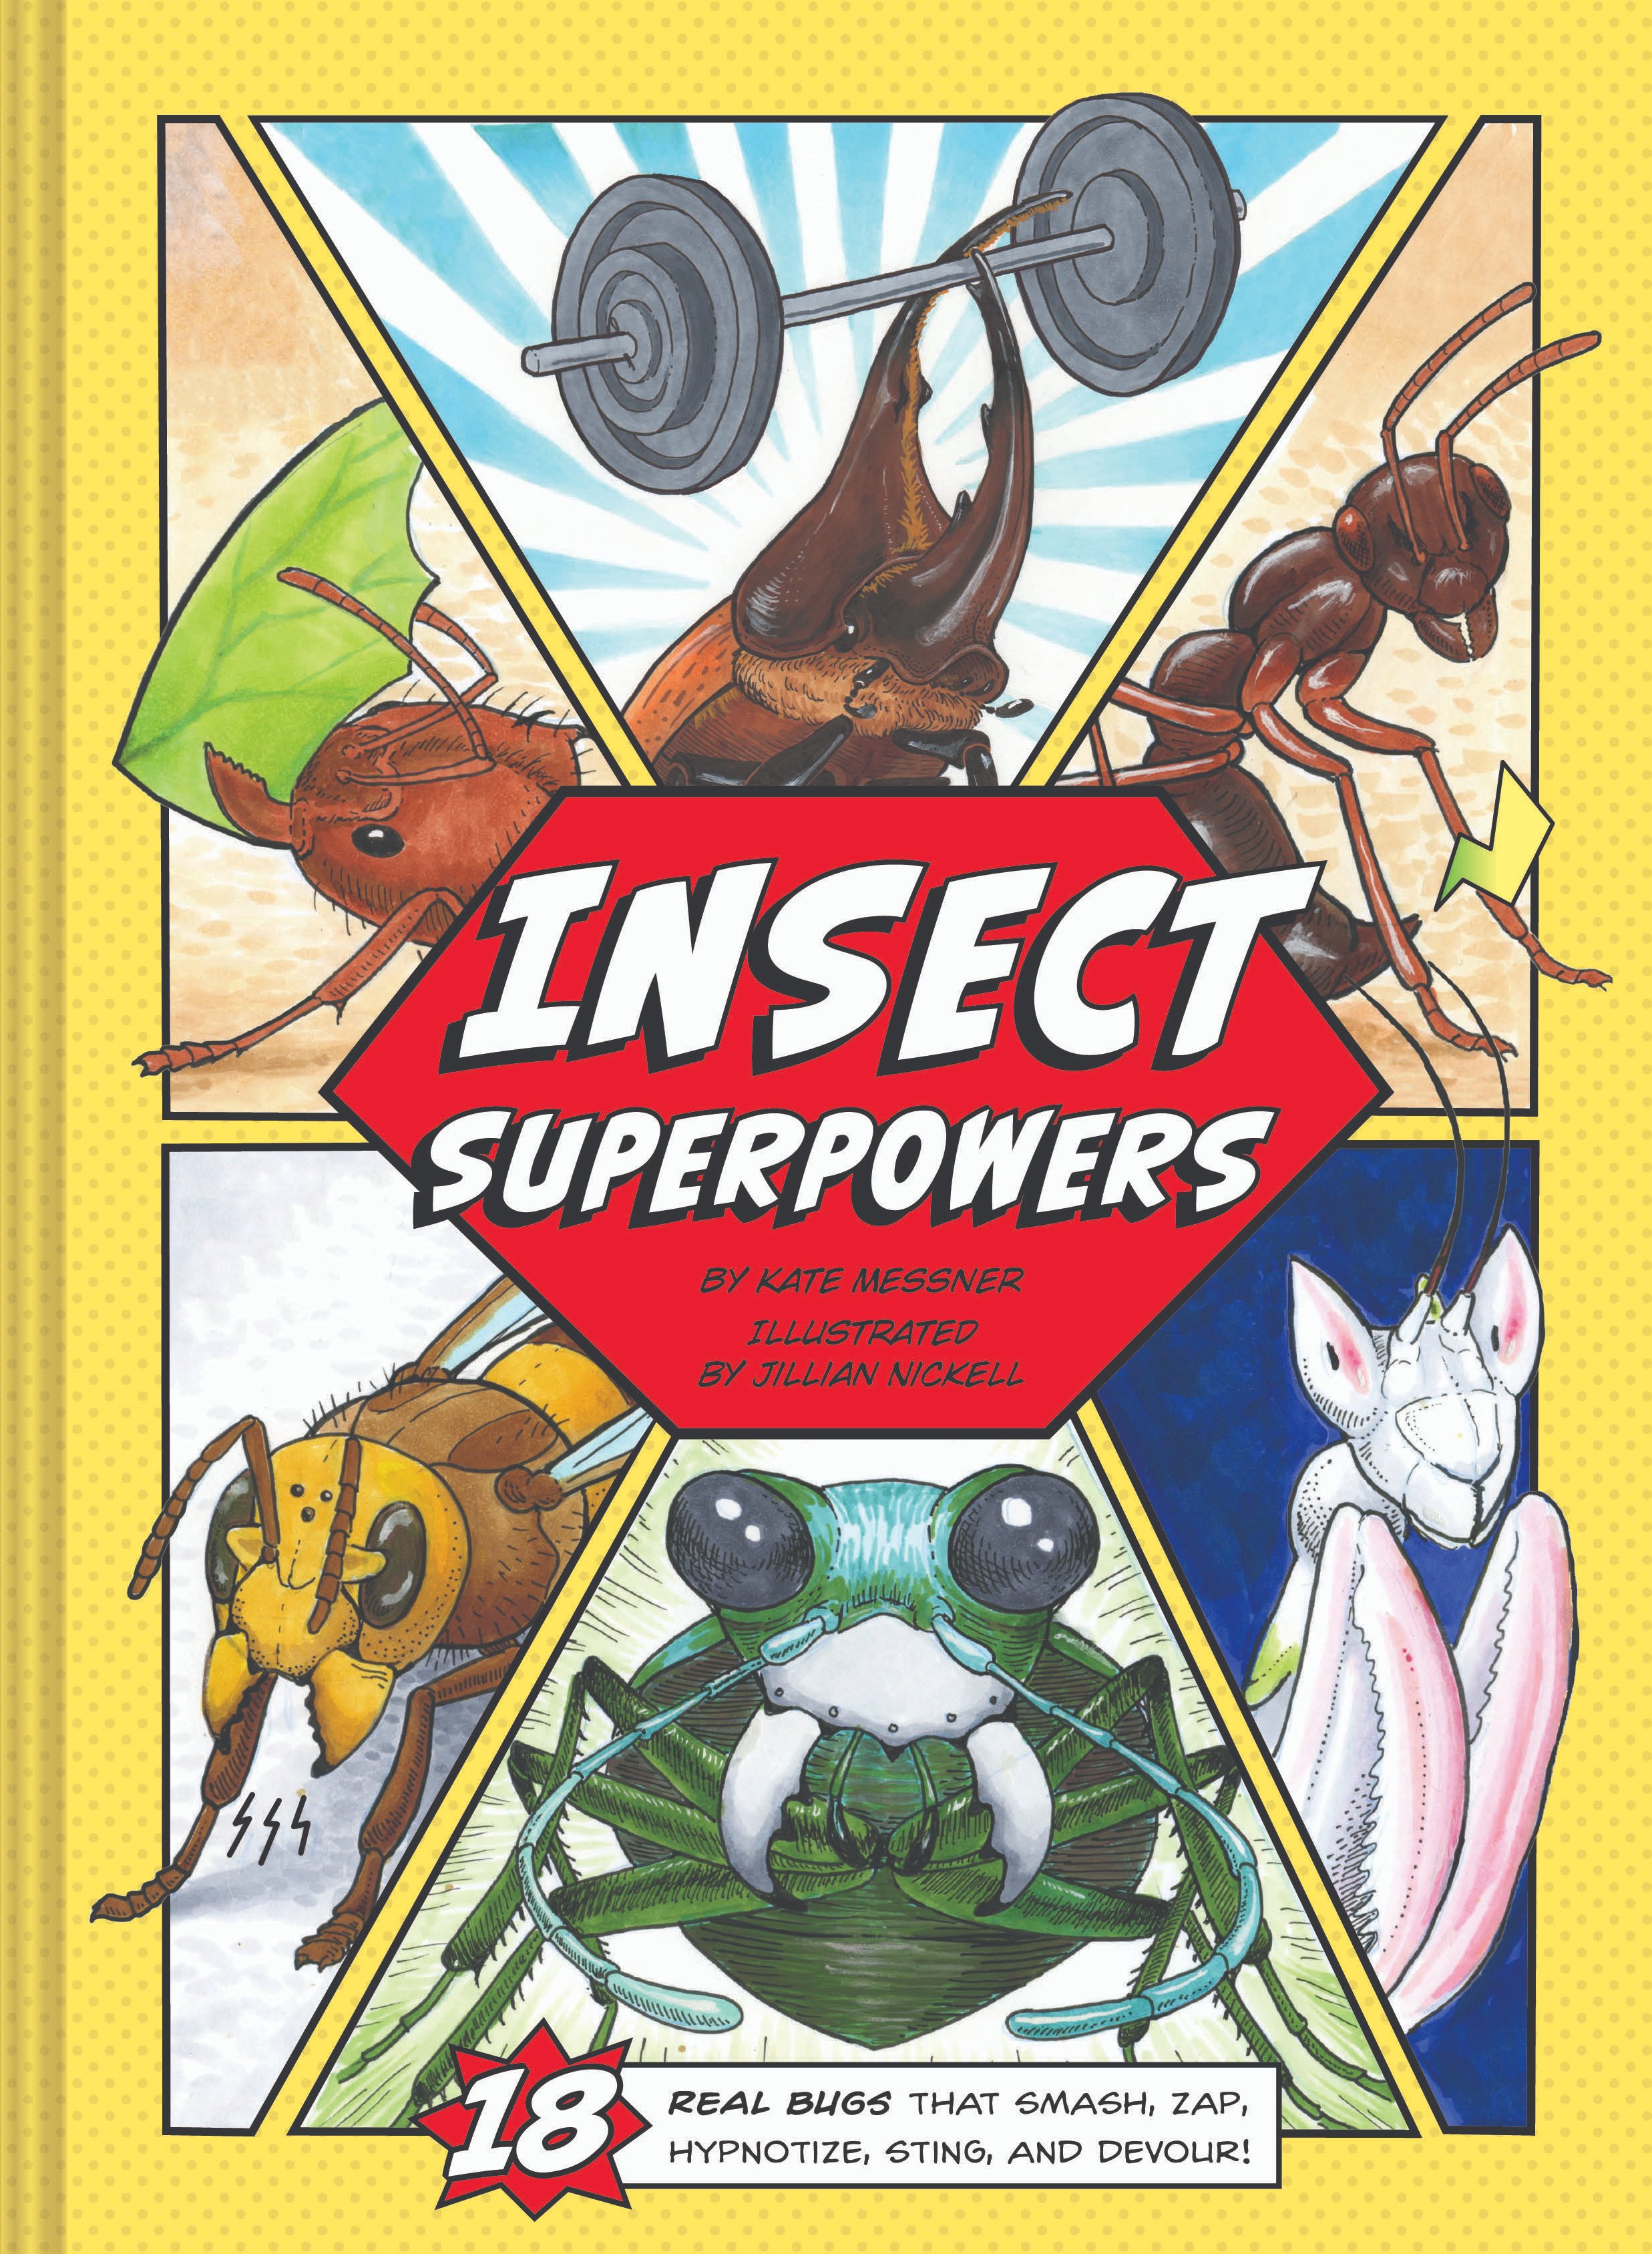 Image for Illustrator Jillian Nickell: Insect Superpowers